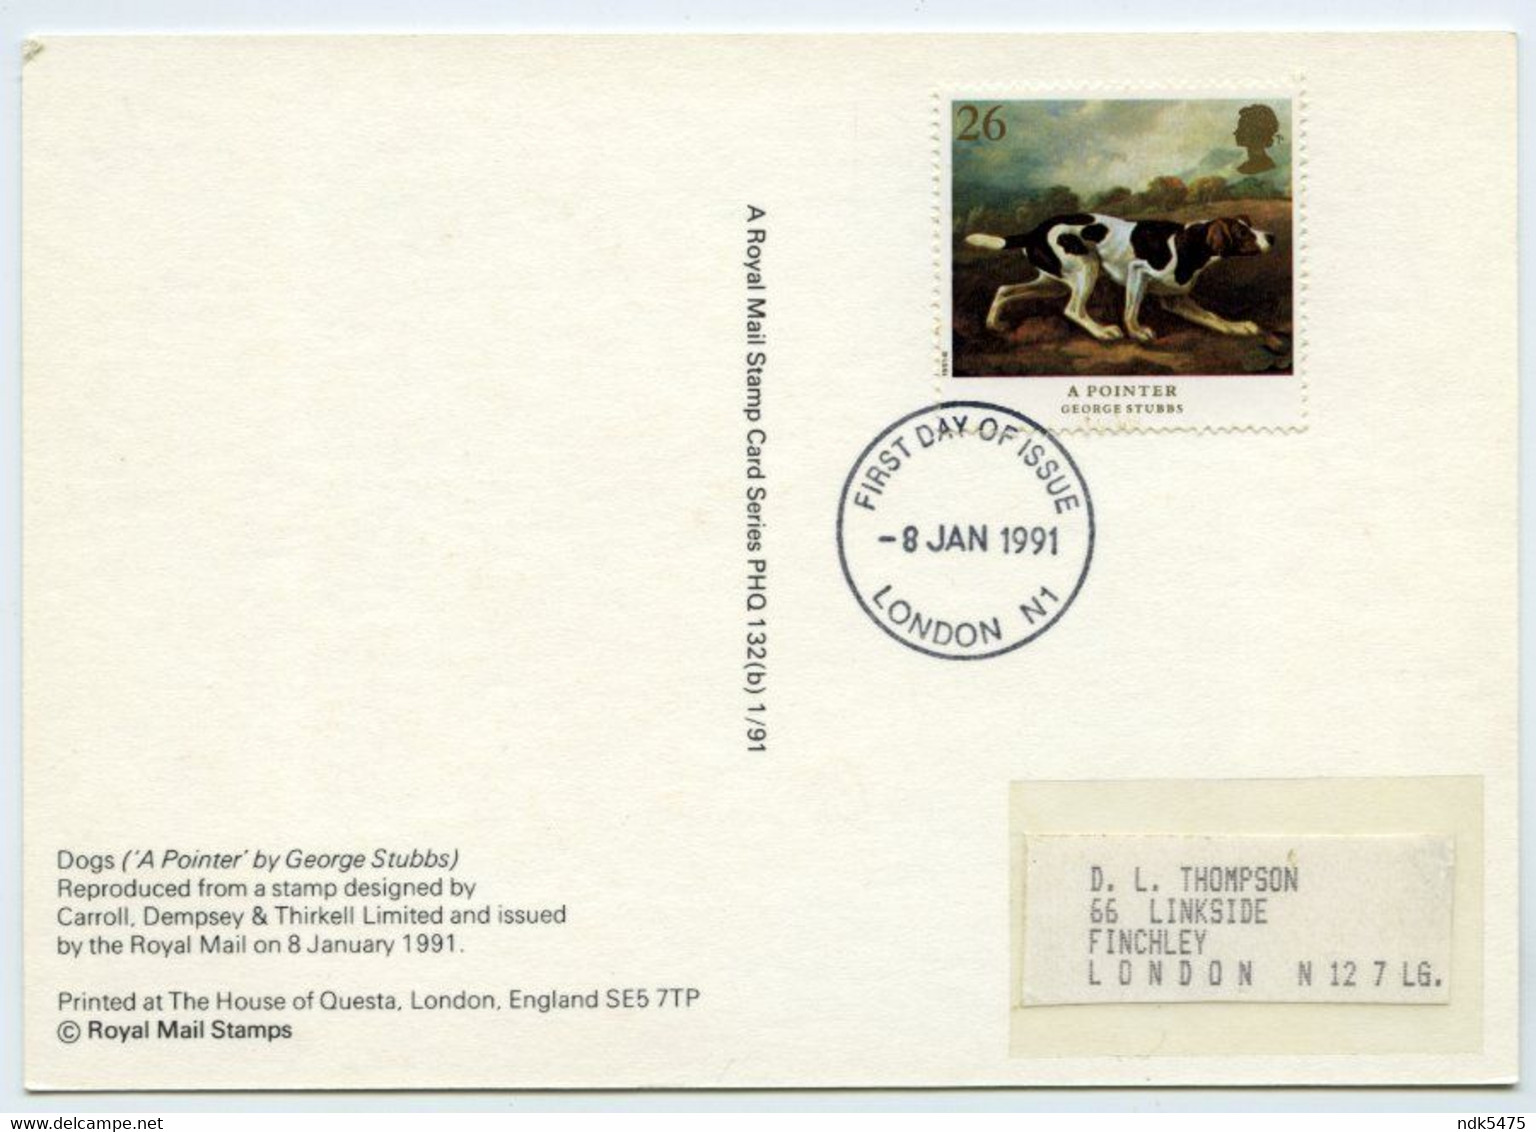 PHQ : GEORGE STUBBS - DOGS, A POINTER, 1991 : FIRST DAY OF ISSUE, LONDON N1, FINCHLEY (10 X 15cms Approx.) - Tarjetas PHQ